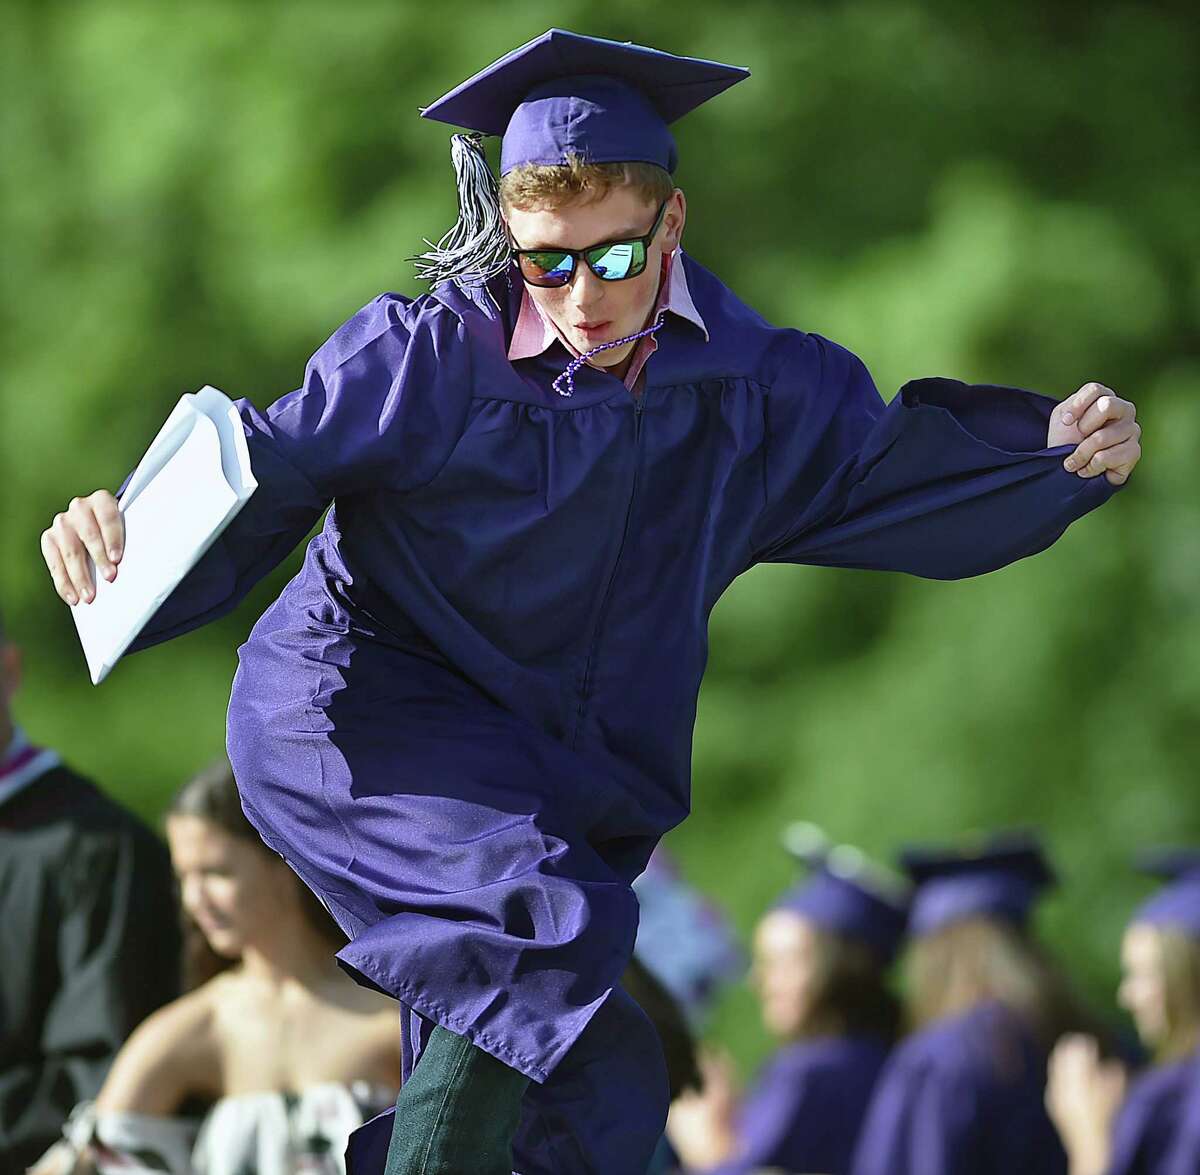 Riley Anderson celebrates after receiving his diploma at commencement exercises at North Branford High School at George A. Colafati Field, Friday, June 15, 2018.